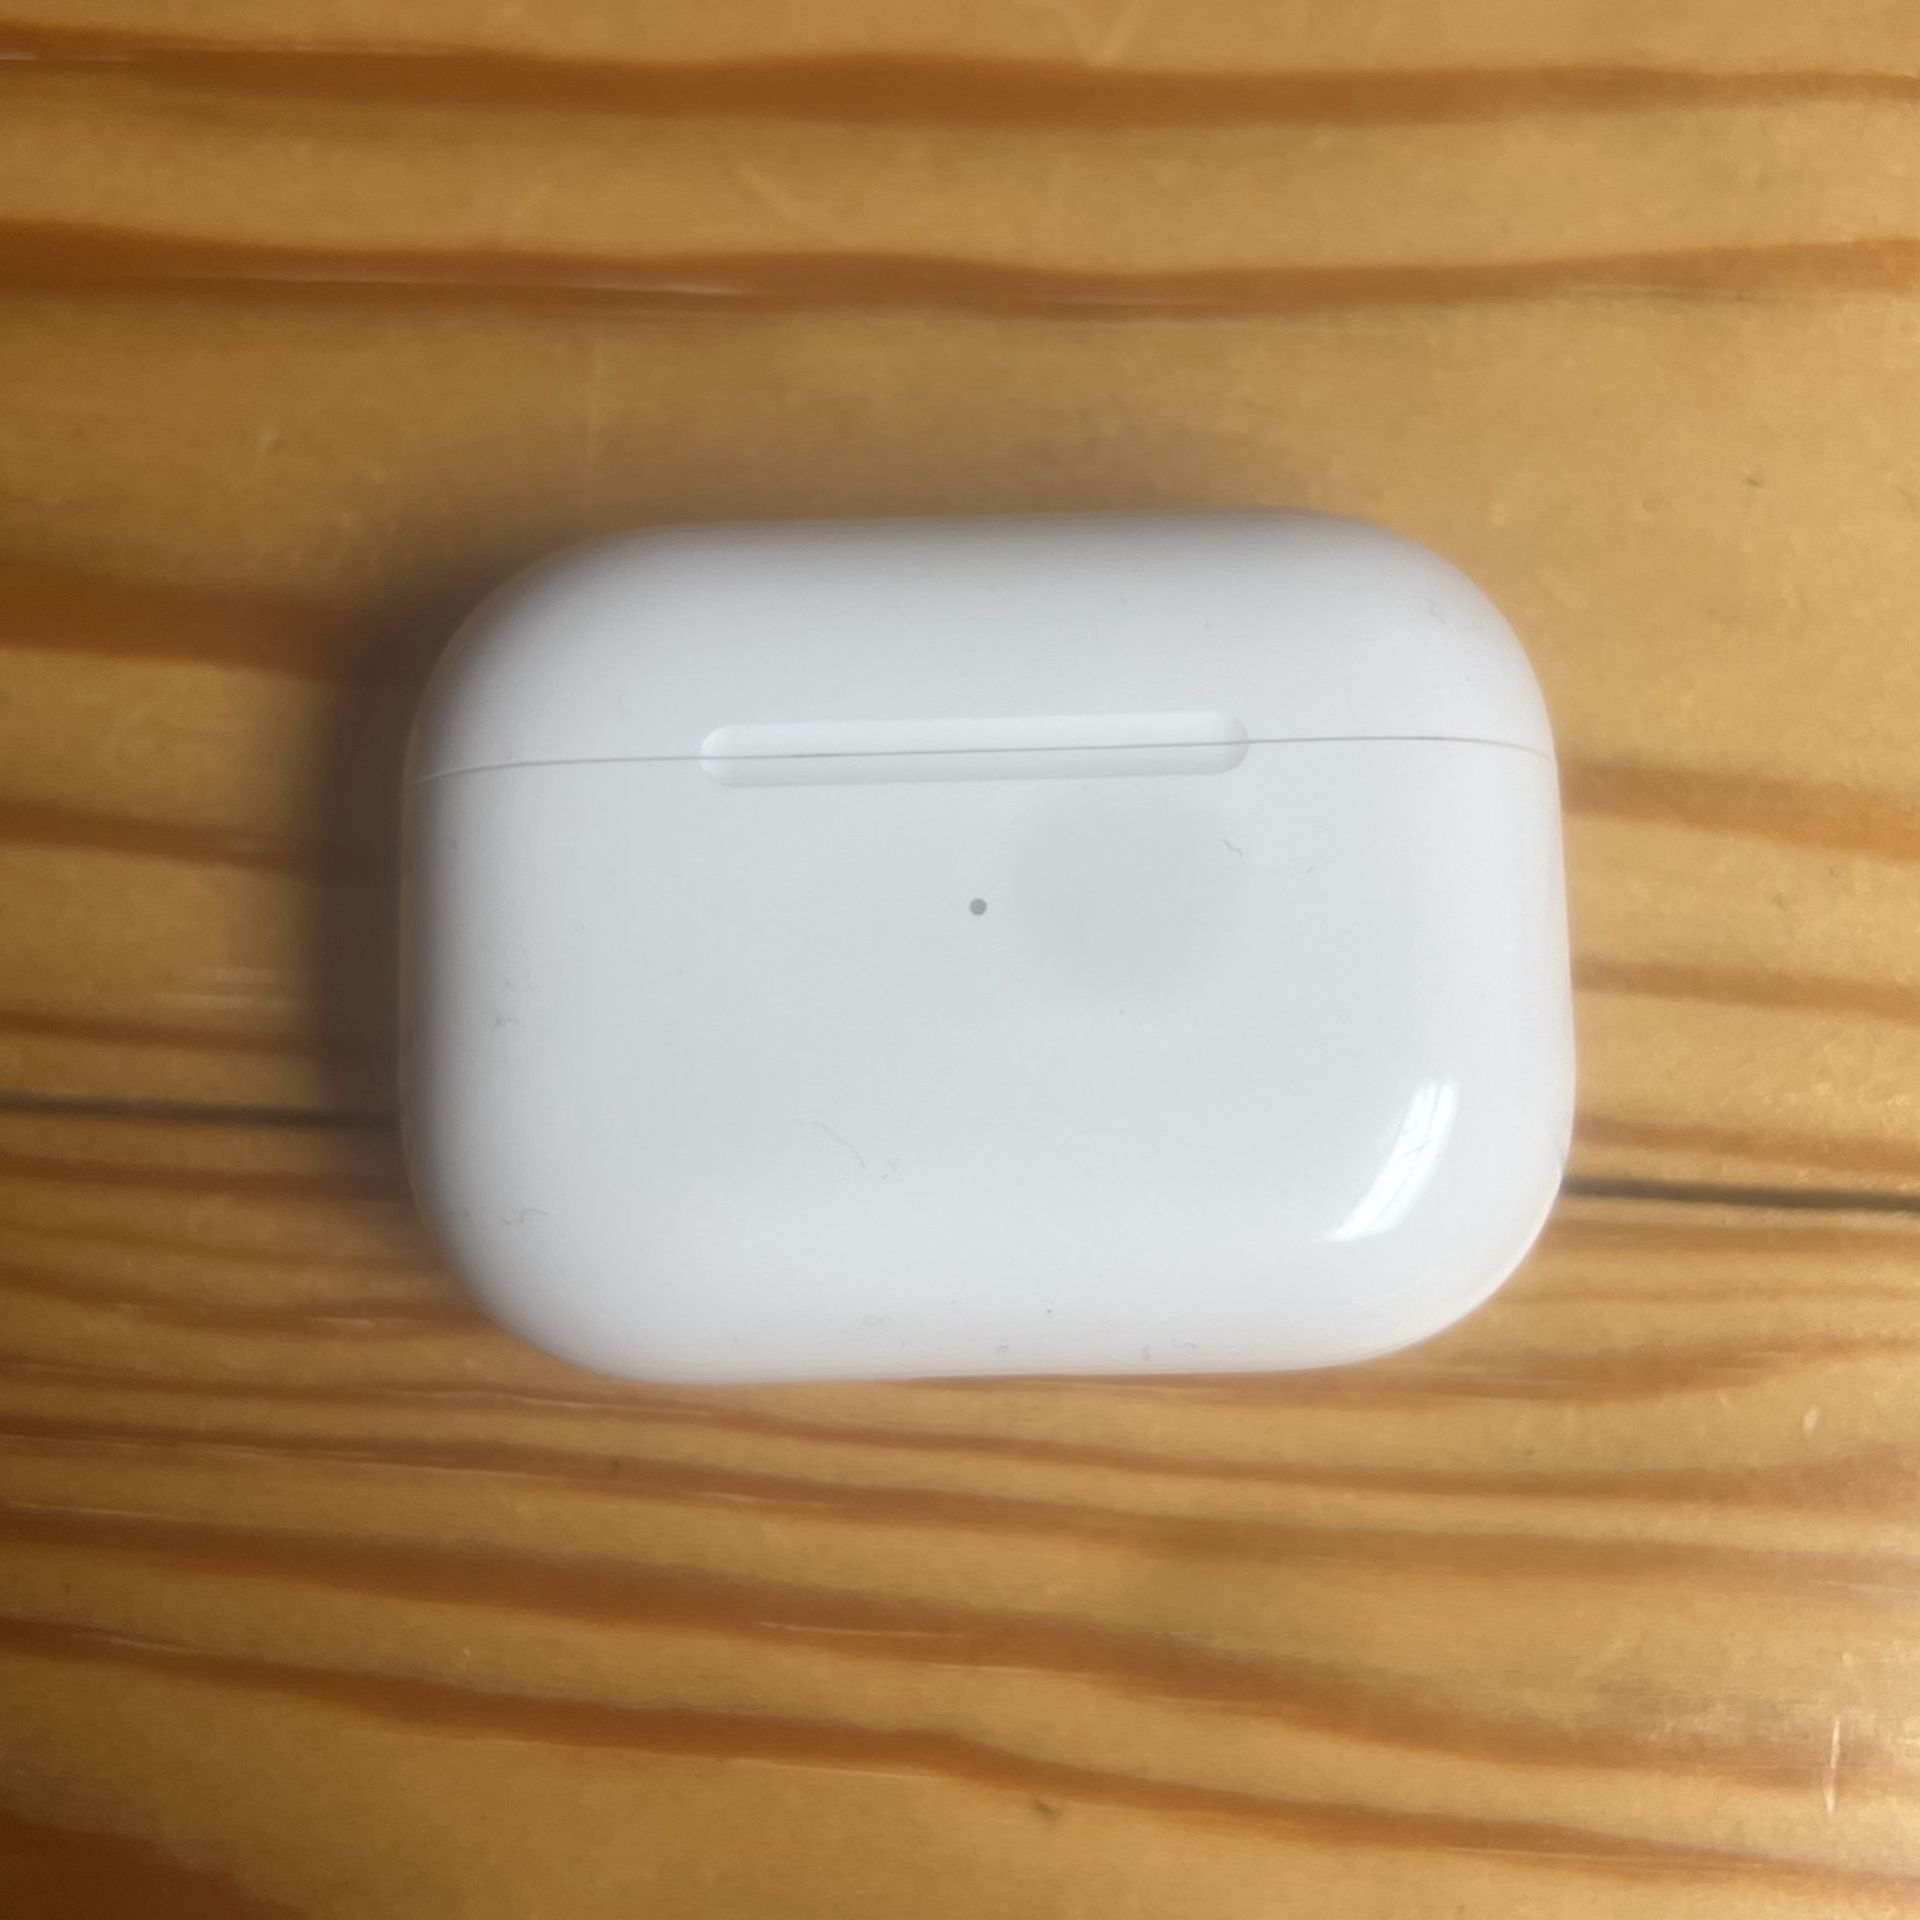 AirPod pros with case